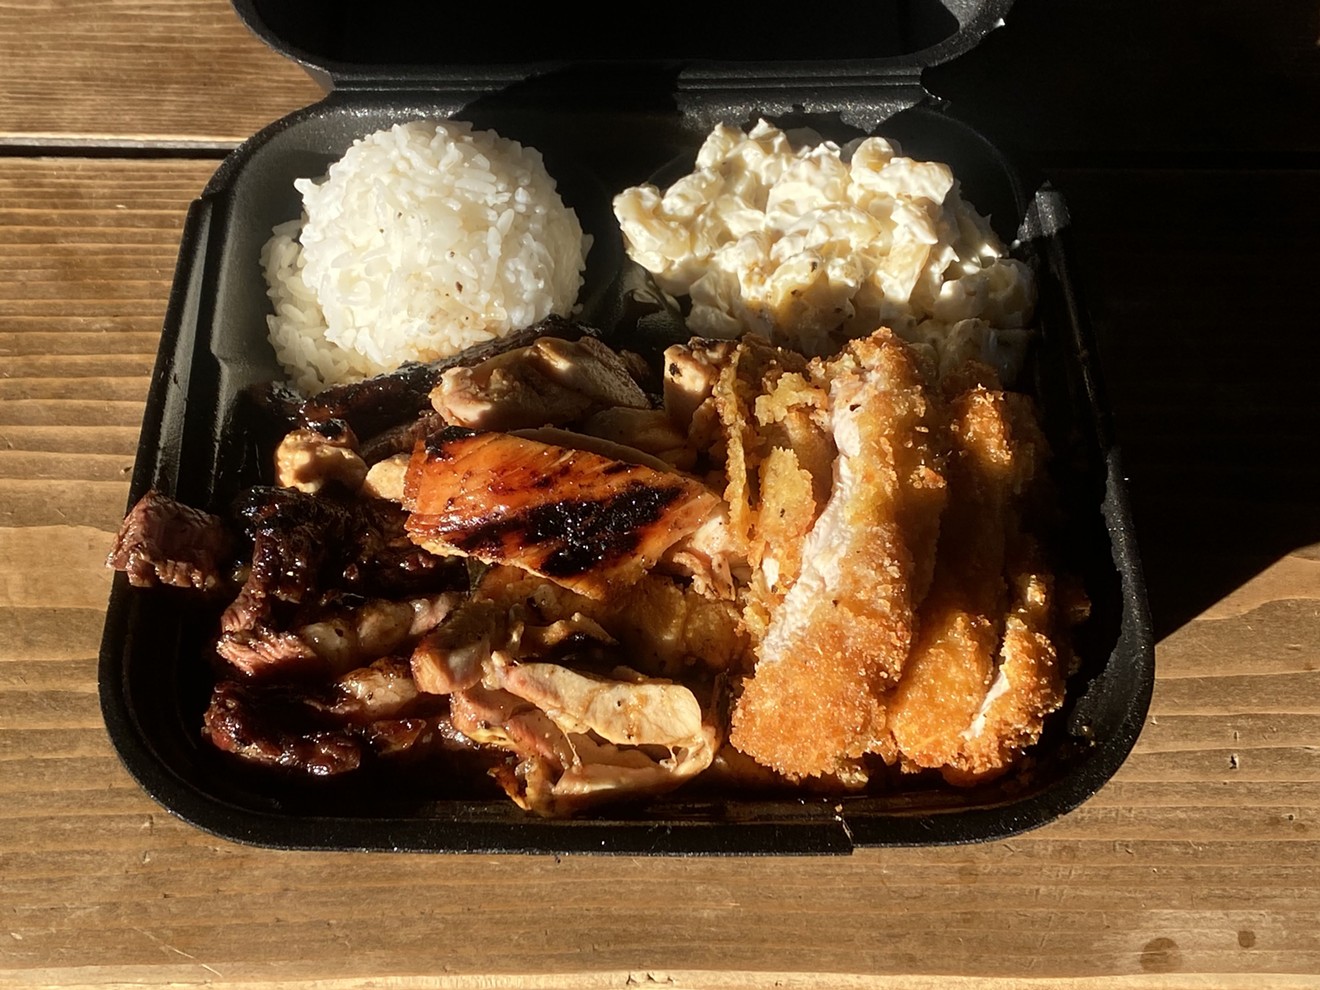 Da Loco comes with a choice of three entrees. Pictured are the teriyaki chicken, steak and chicken katsu.